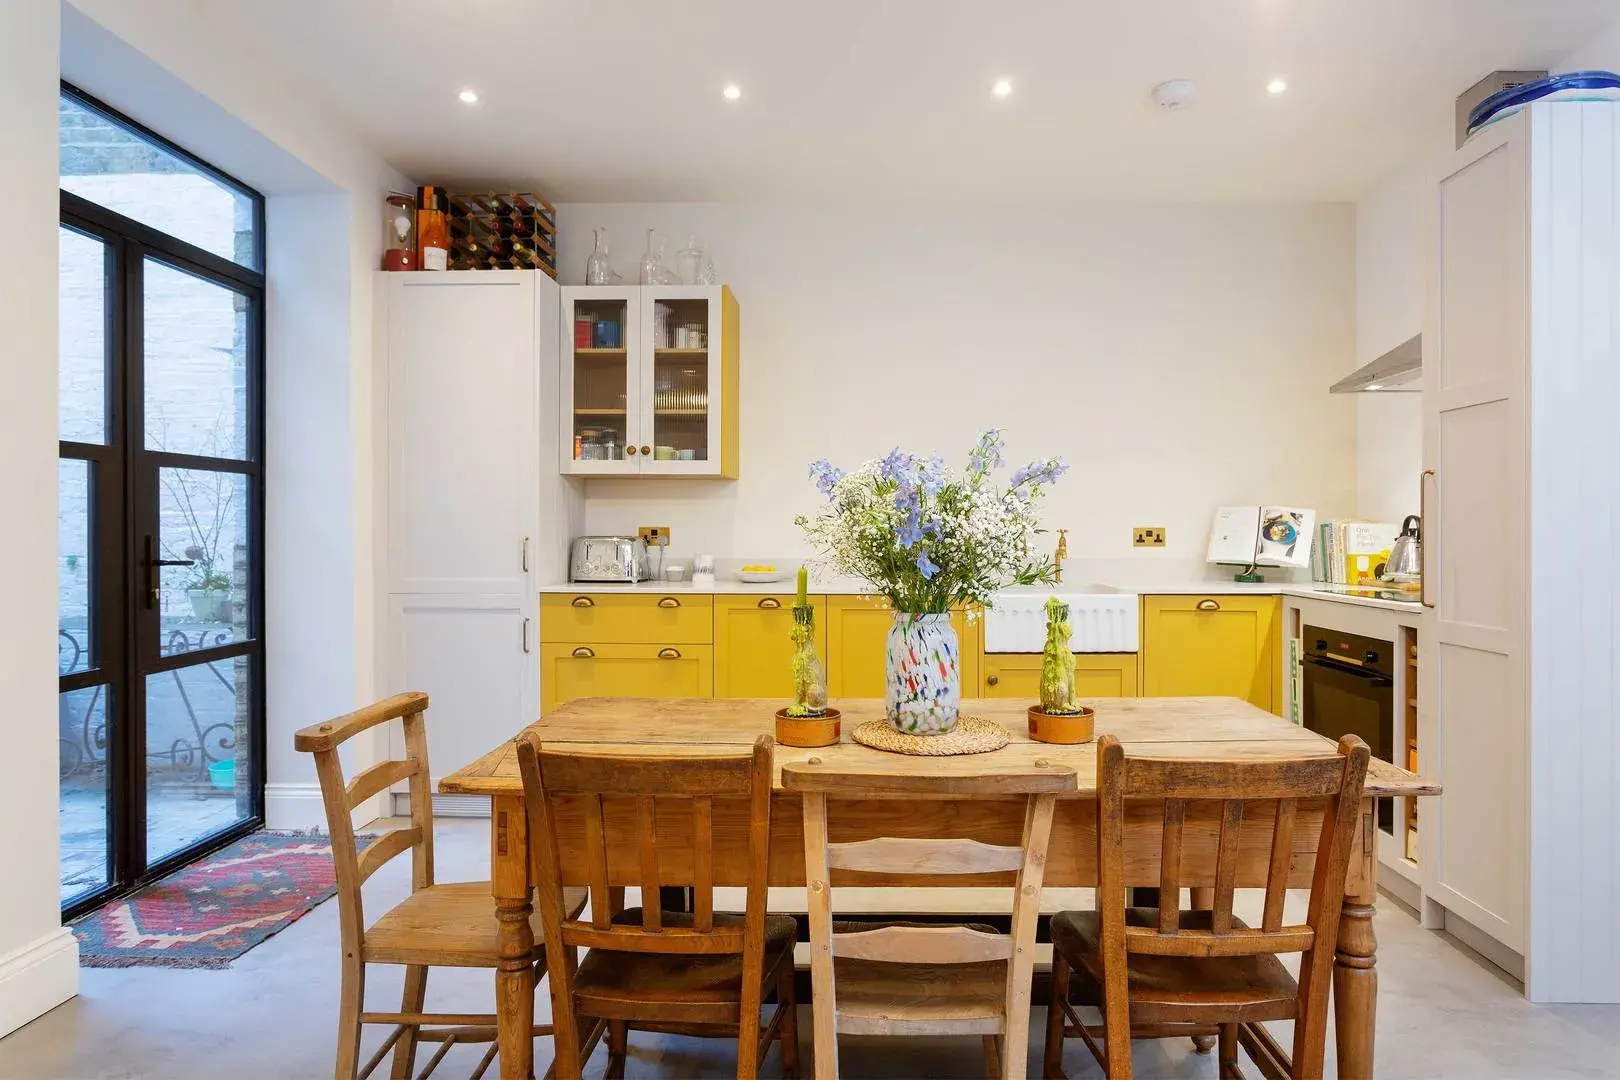 Ladbroke Road, holiday home in Notting Hill, London